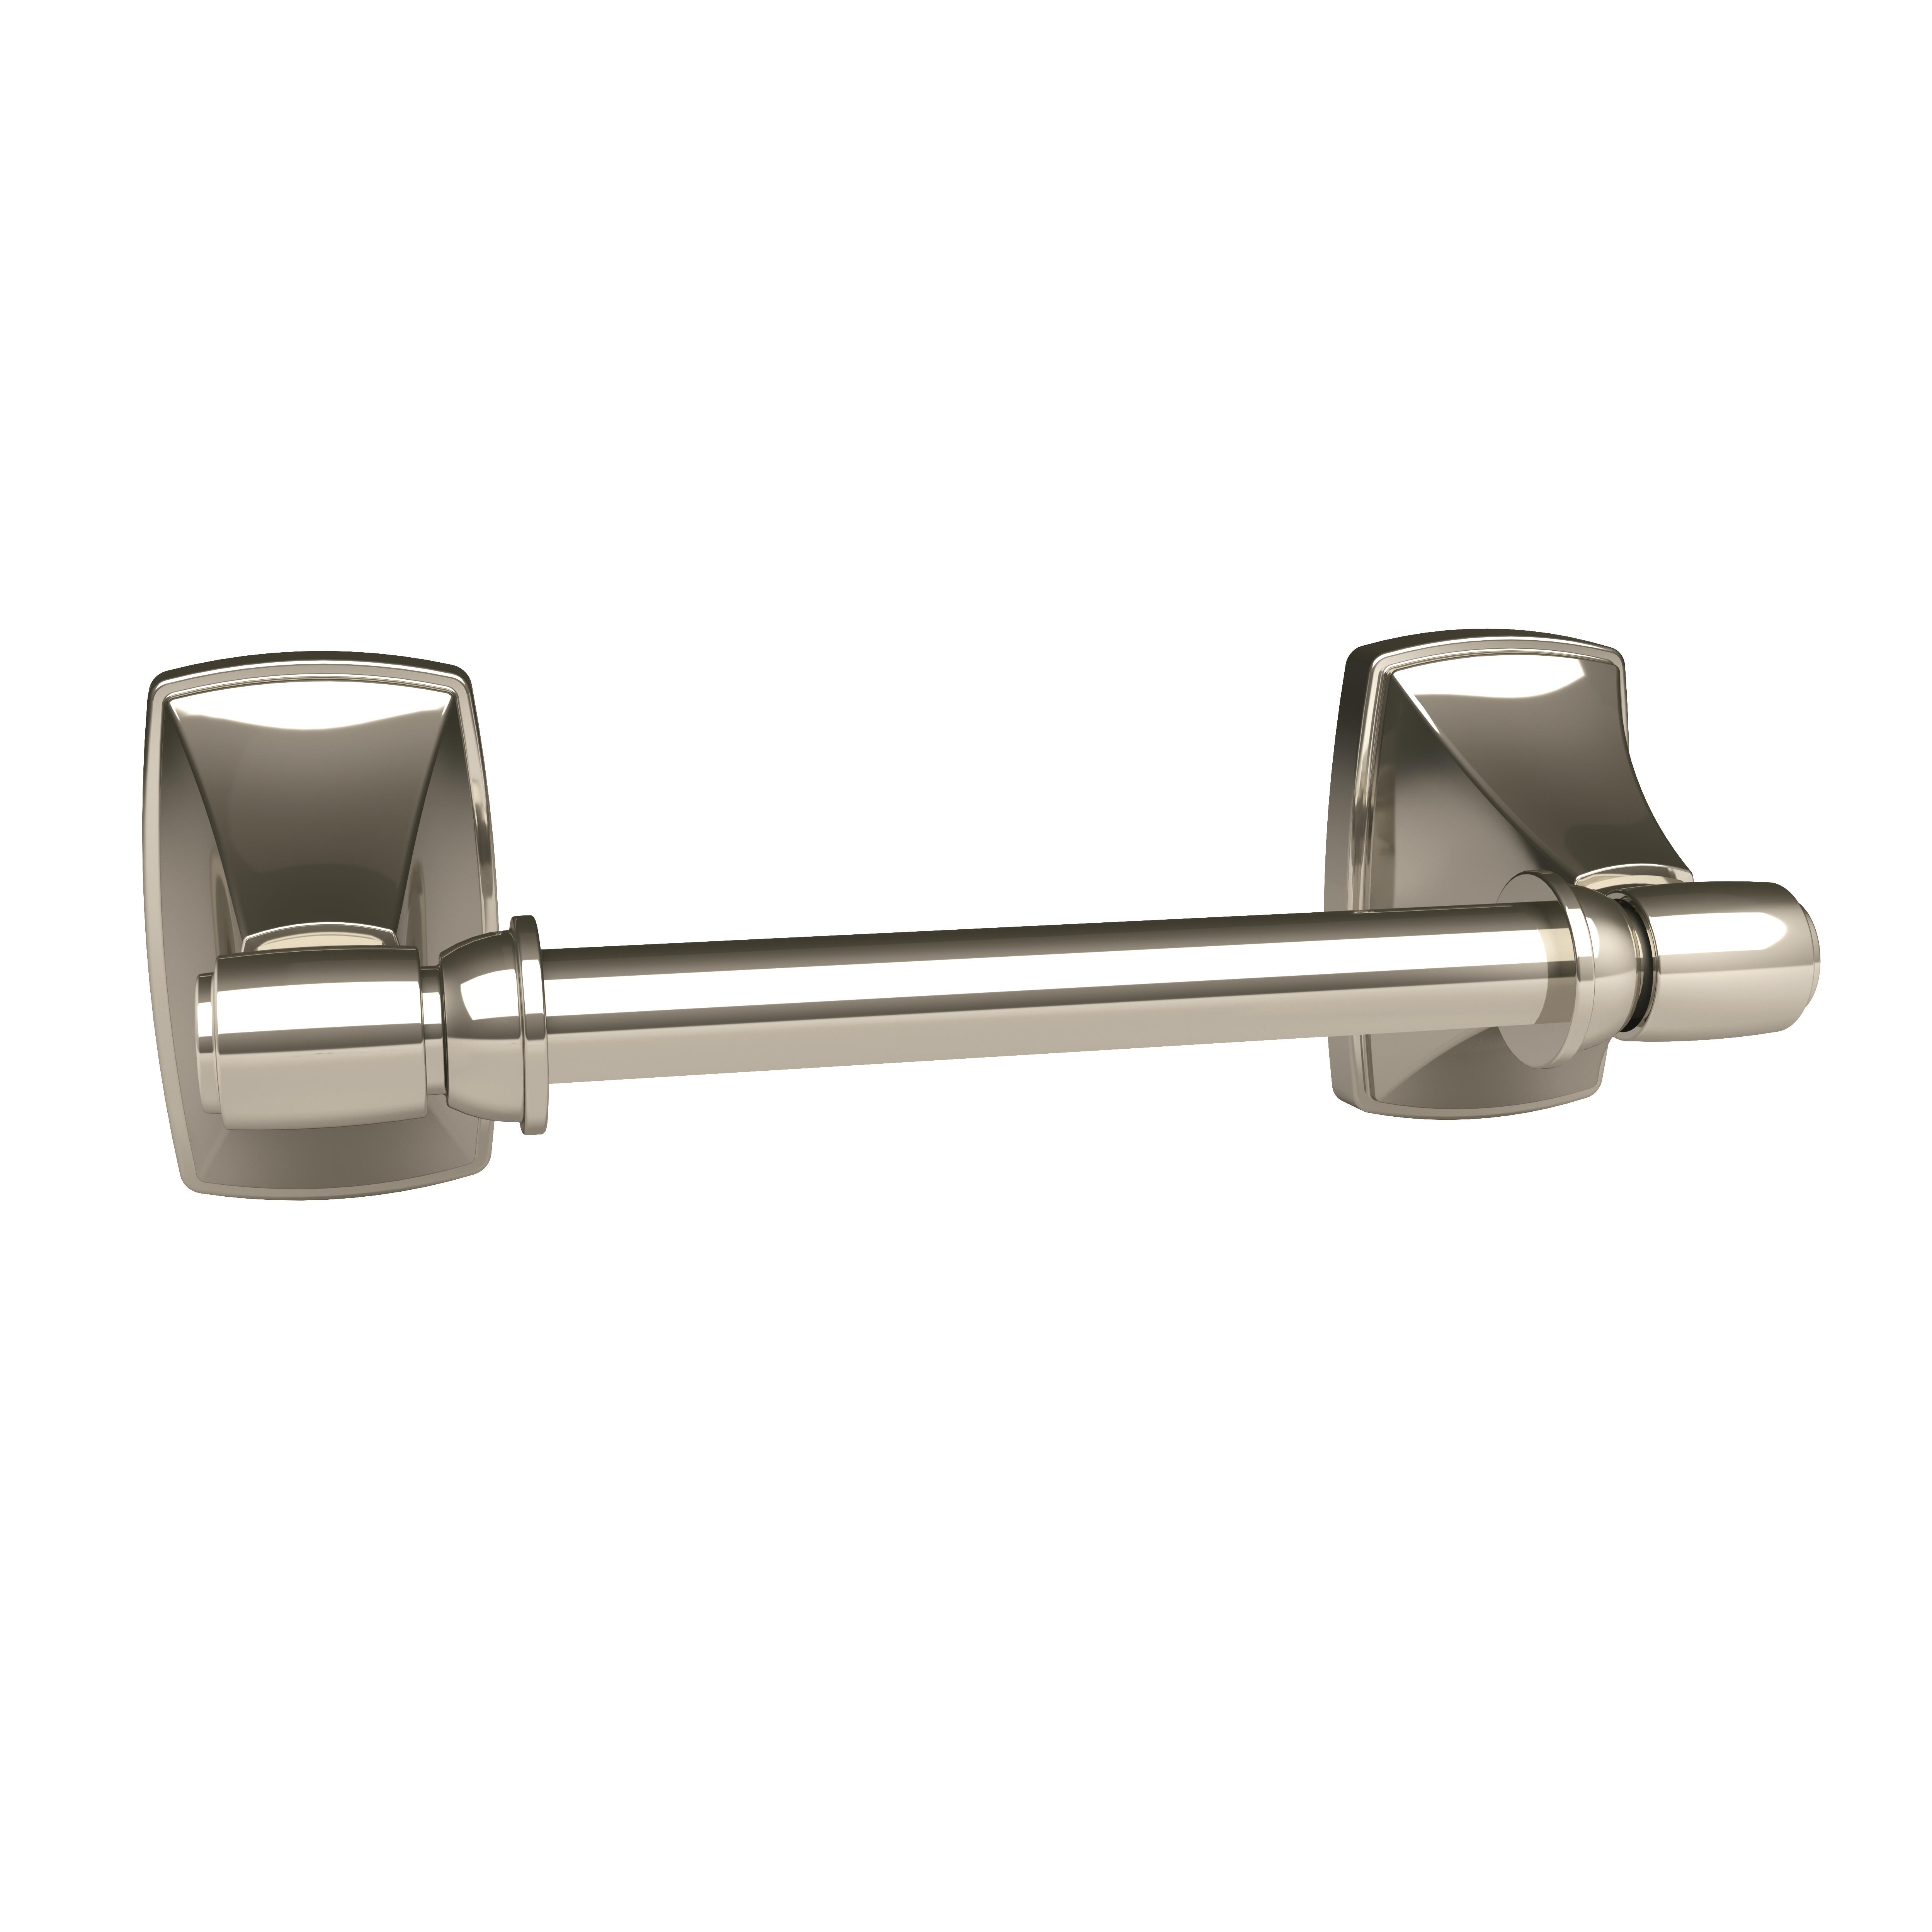 Oil Rubbed Bronze Amerock BH26517-Orb Markham Collection Pivoting Double Post Tissue Roll Holder